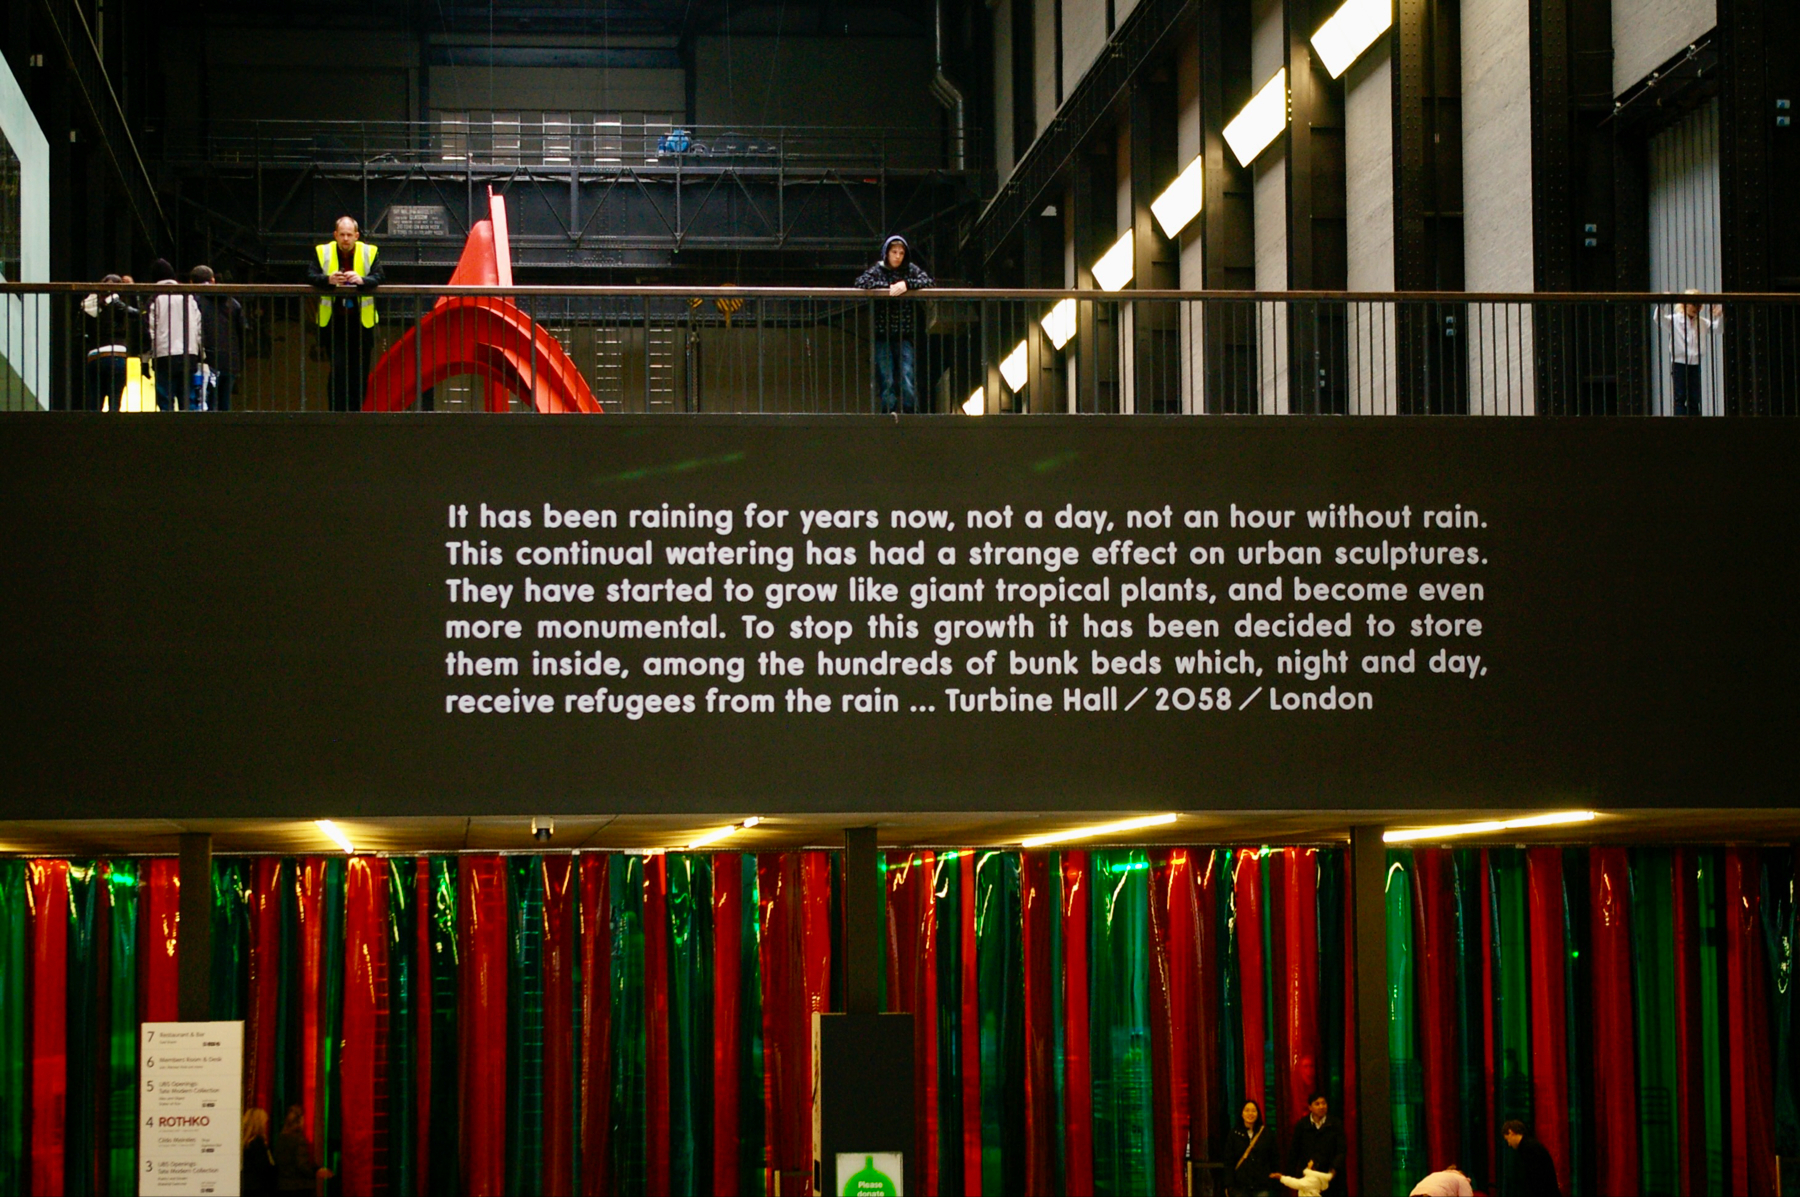 Interior view of a building with an artistic installation: a text panel with a narrative about continuous rain and its effects on urban sculptures, set in the future, above a colorful fringe curtain. People are visible on an upper balcony.